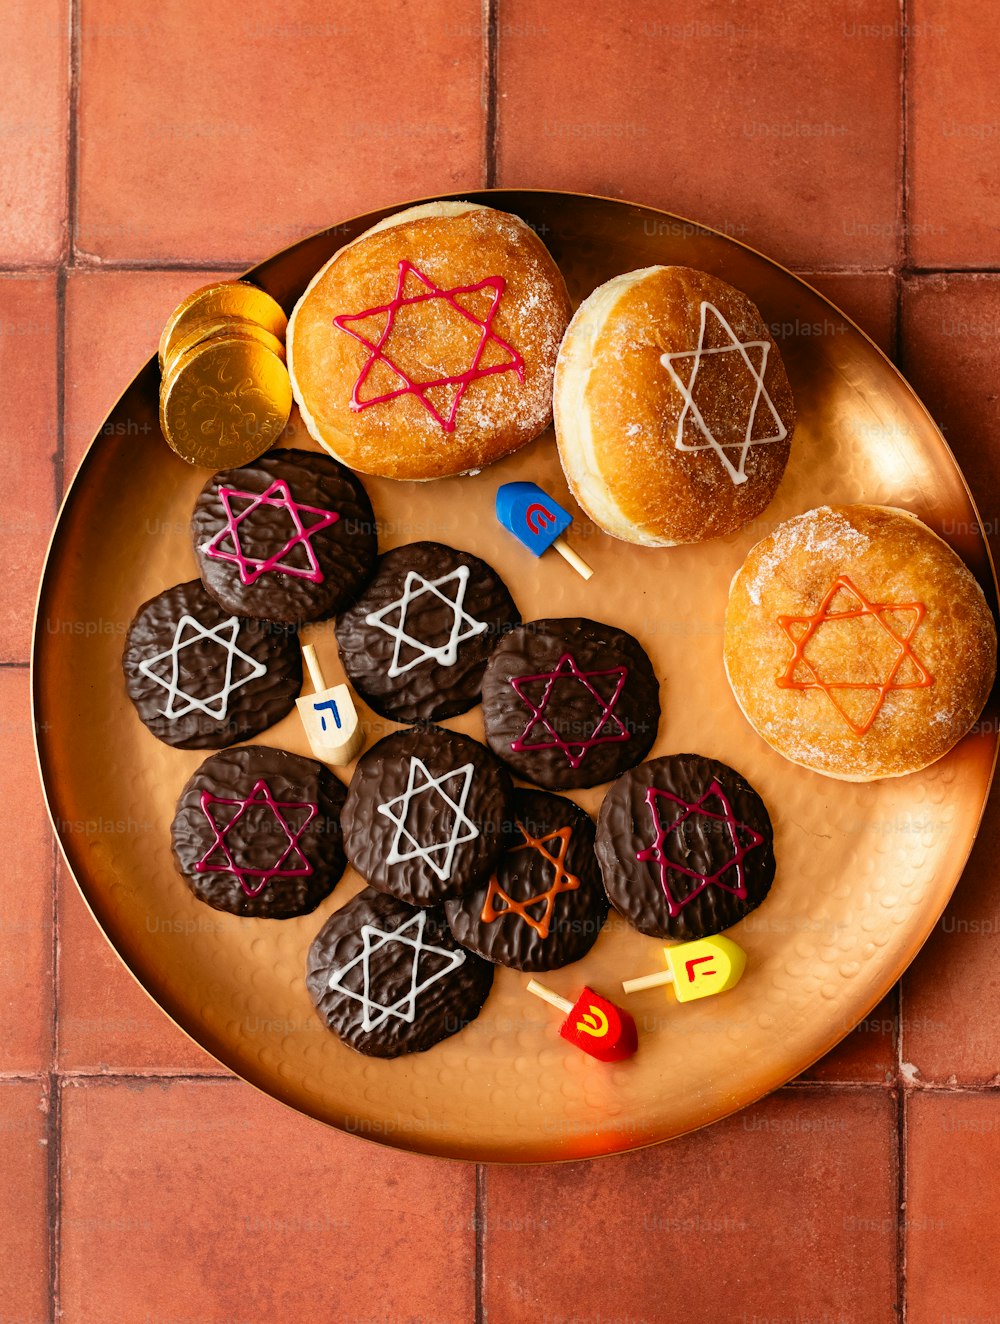 a plate of cookies with symbols on them